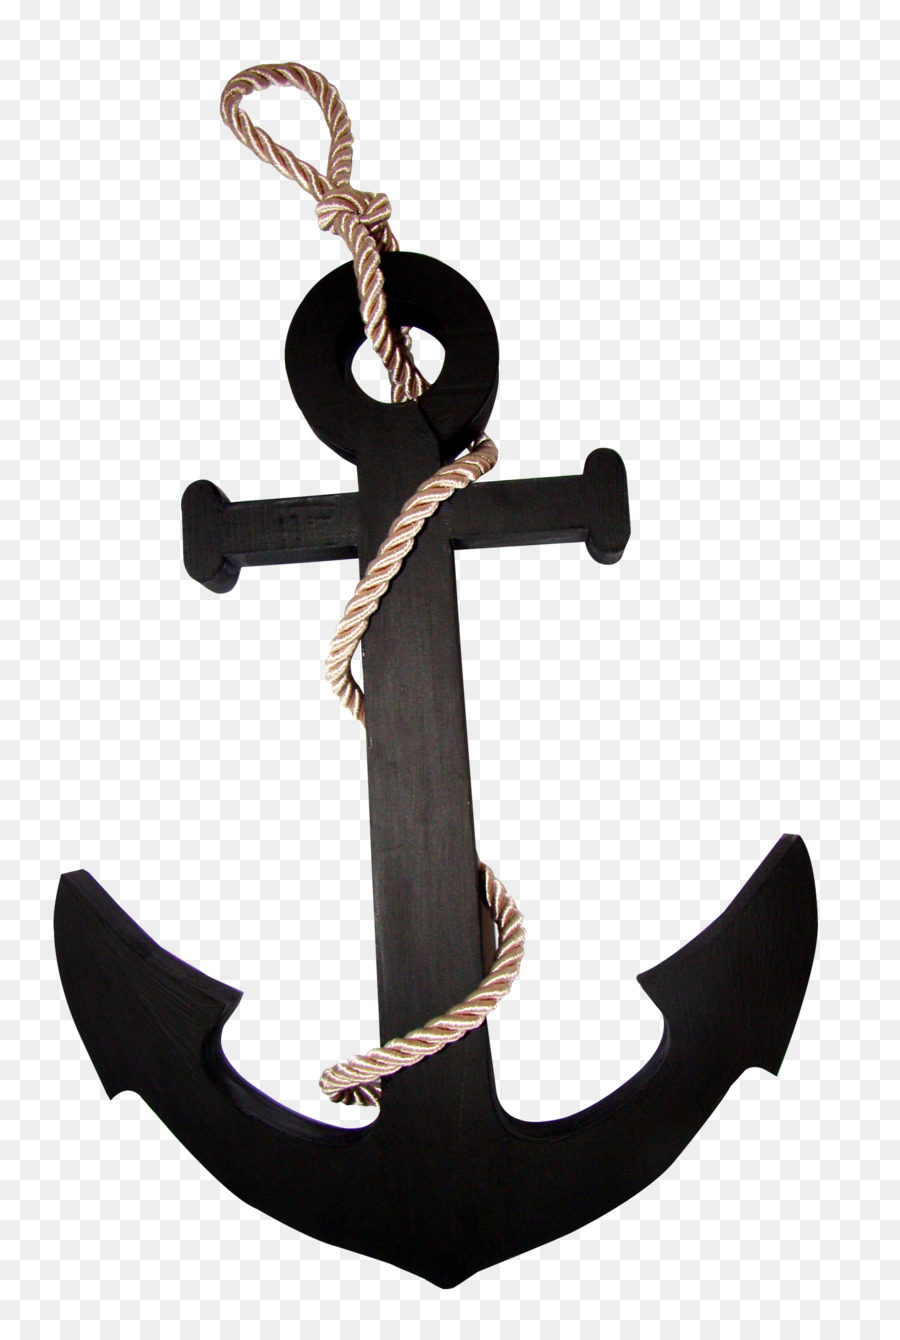 Anchor Icon - Anchor png download - 1640*2422 - Free Transparent Anchor png Download.